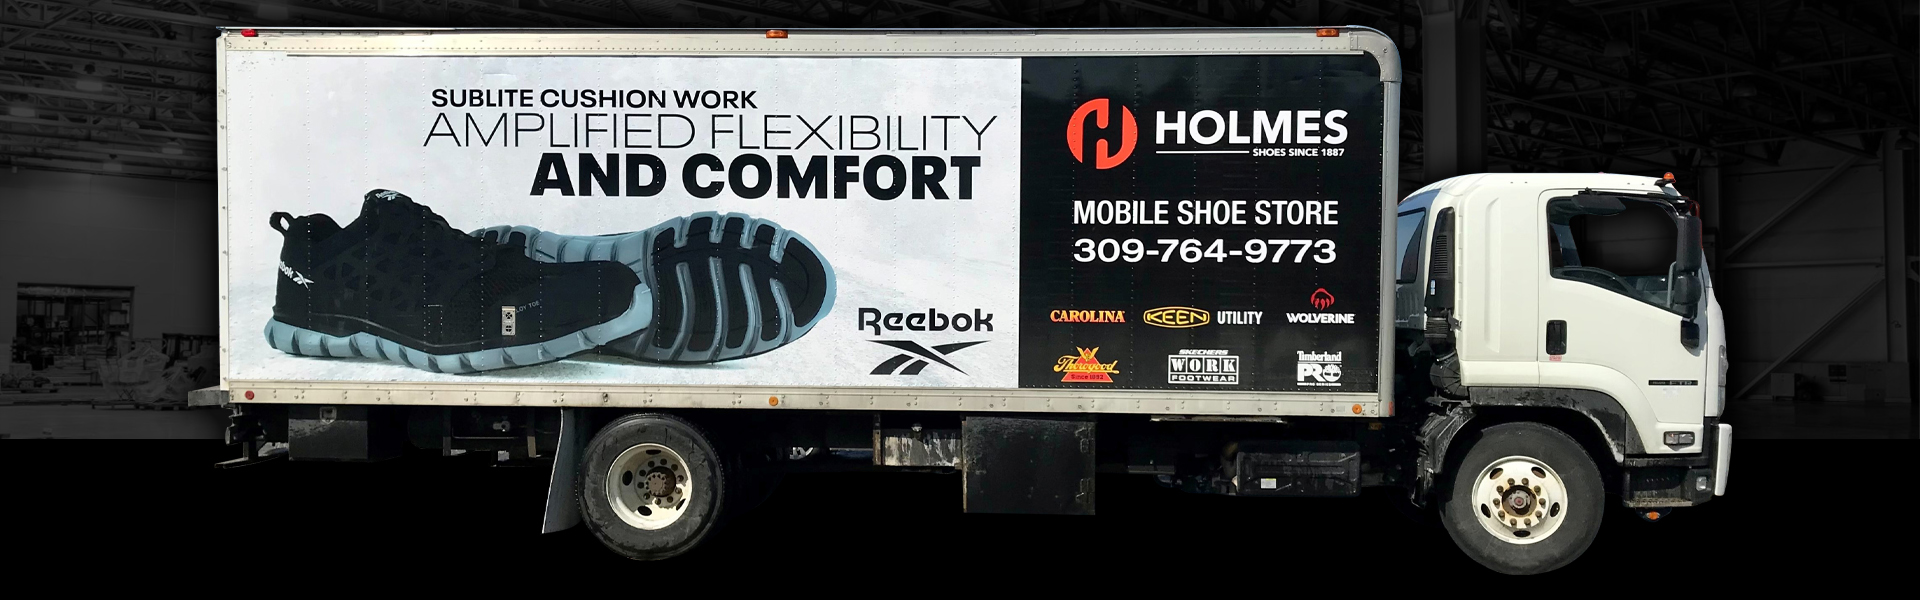 Holmes Shoes - mobile shoe store